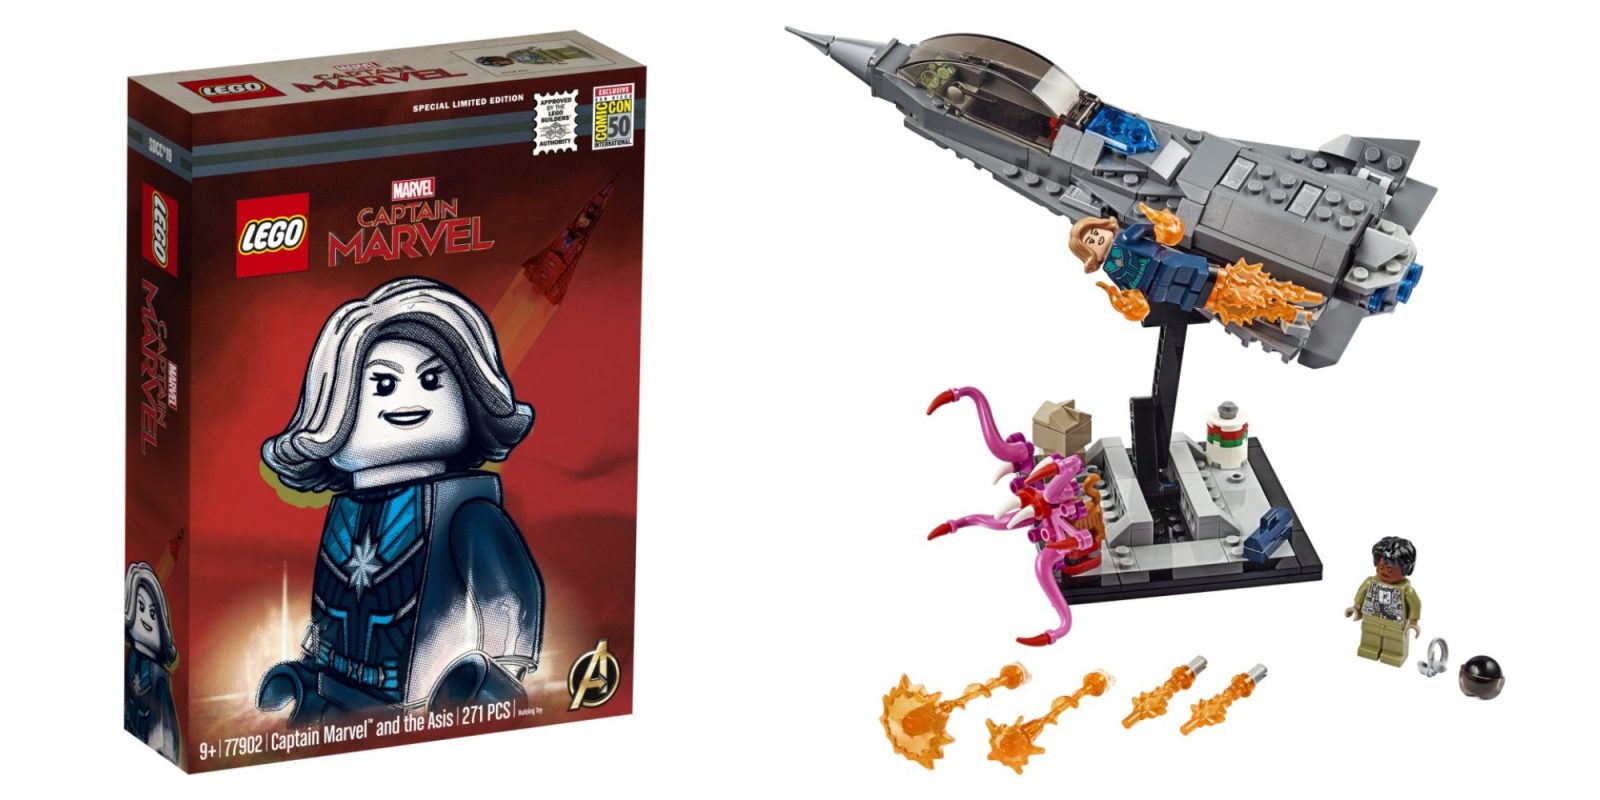 LEGO Captain Marvel SDCC set includes two new minifigures 9to5Toys